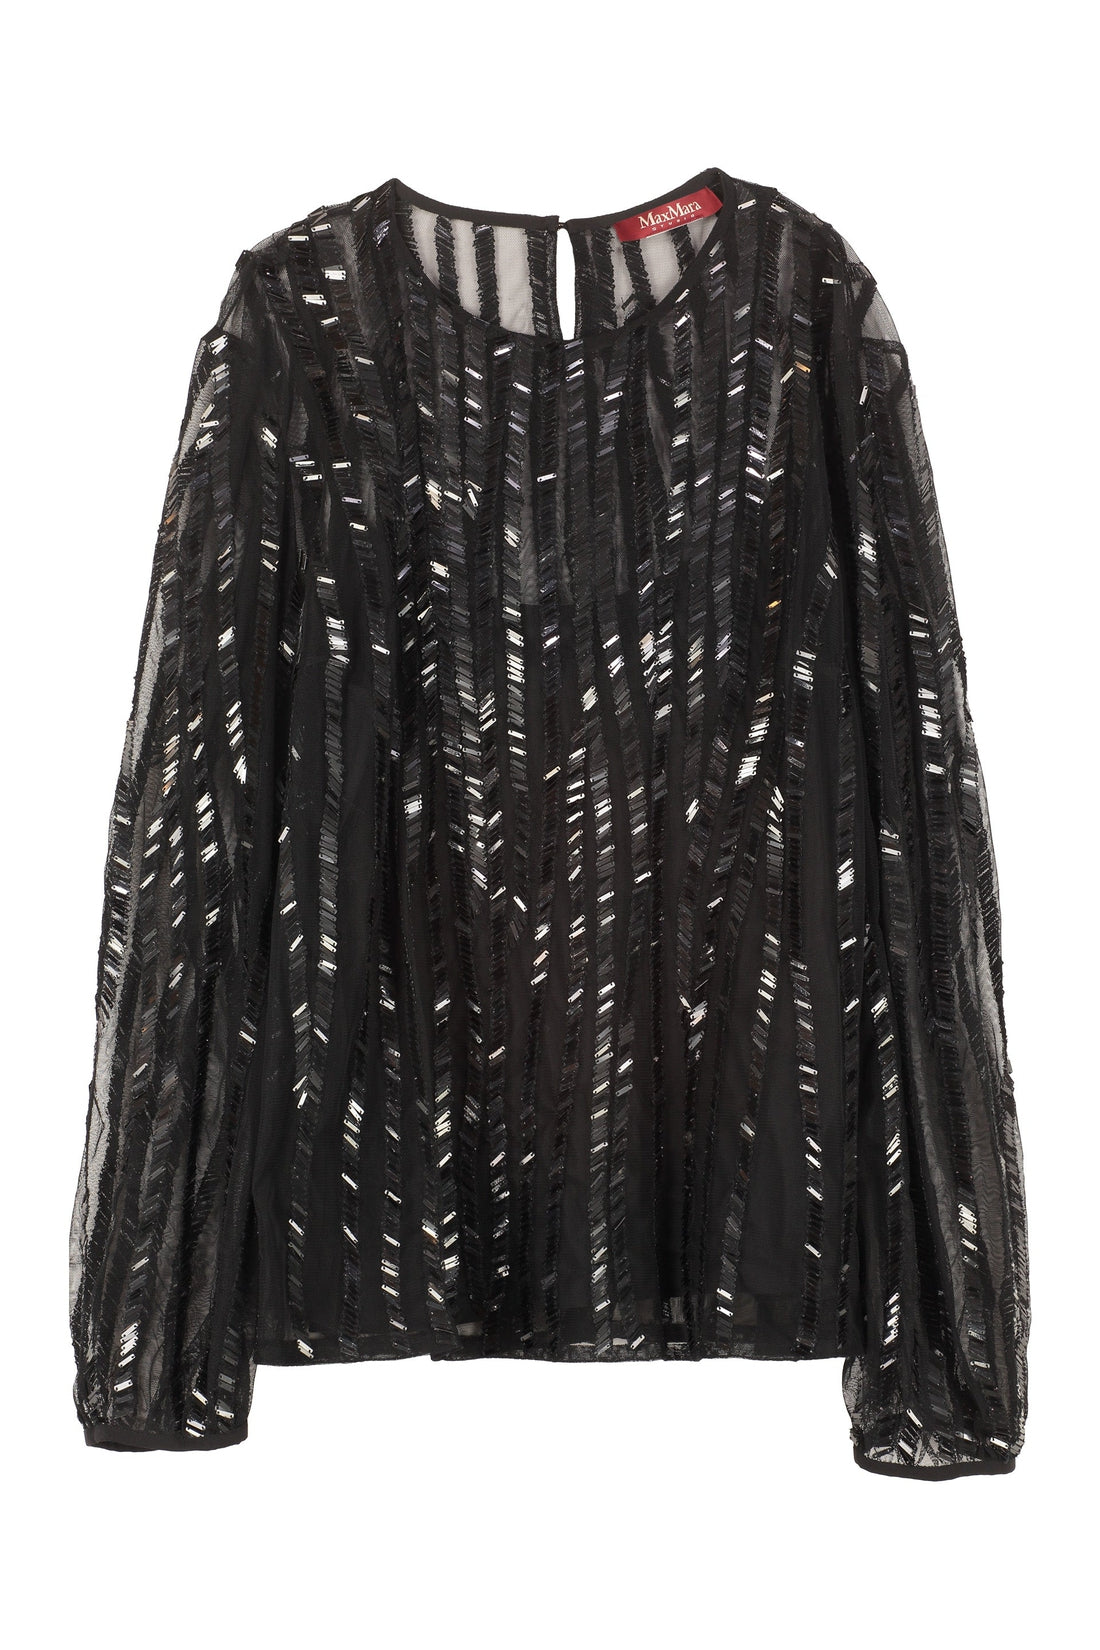 Max Mara Studio-OUTLET-SALE-Girl embroidered blouse-ARCHIVIST